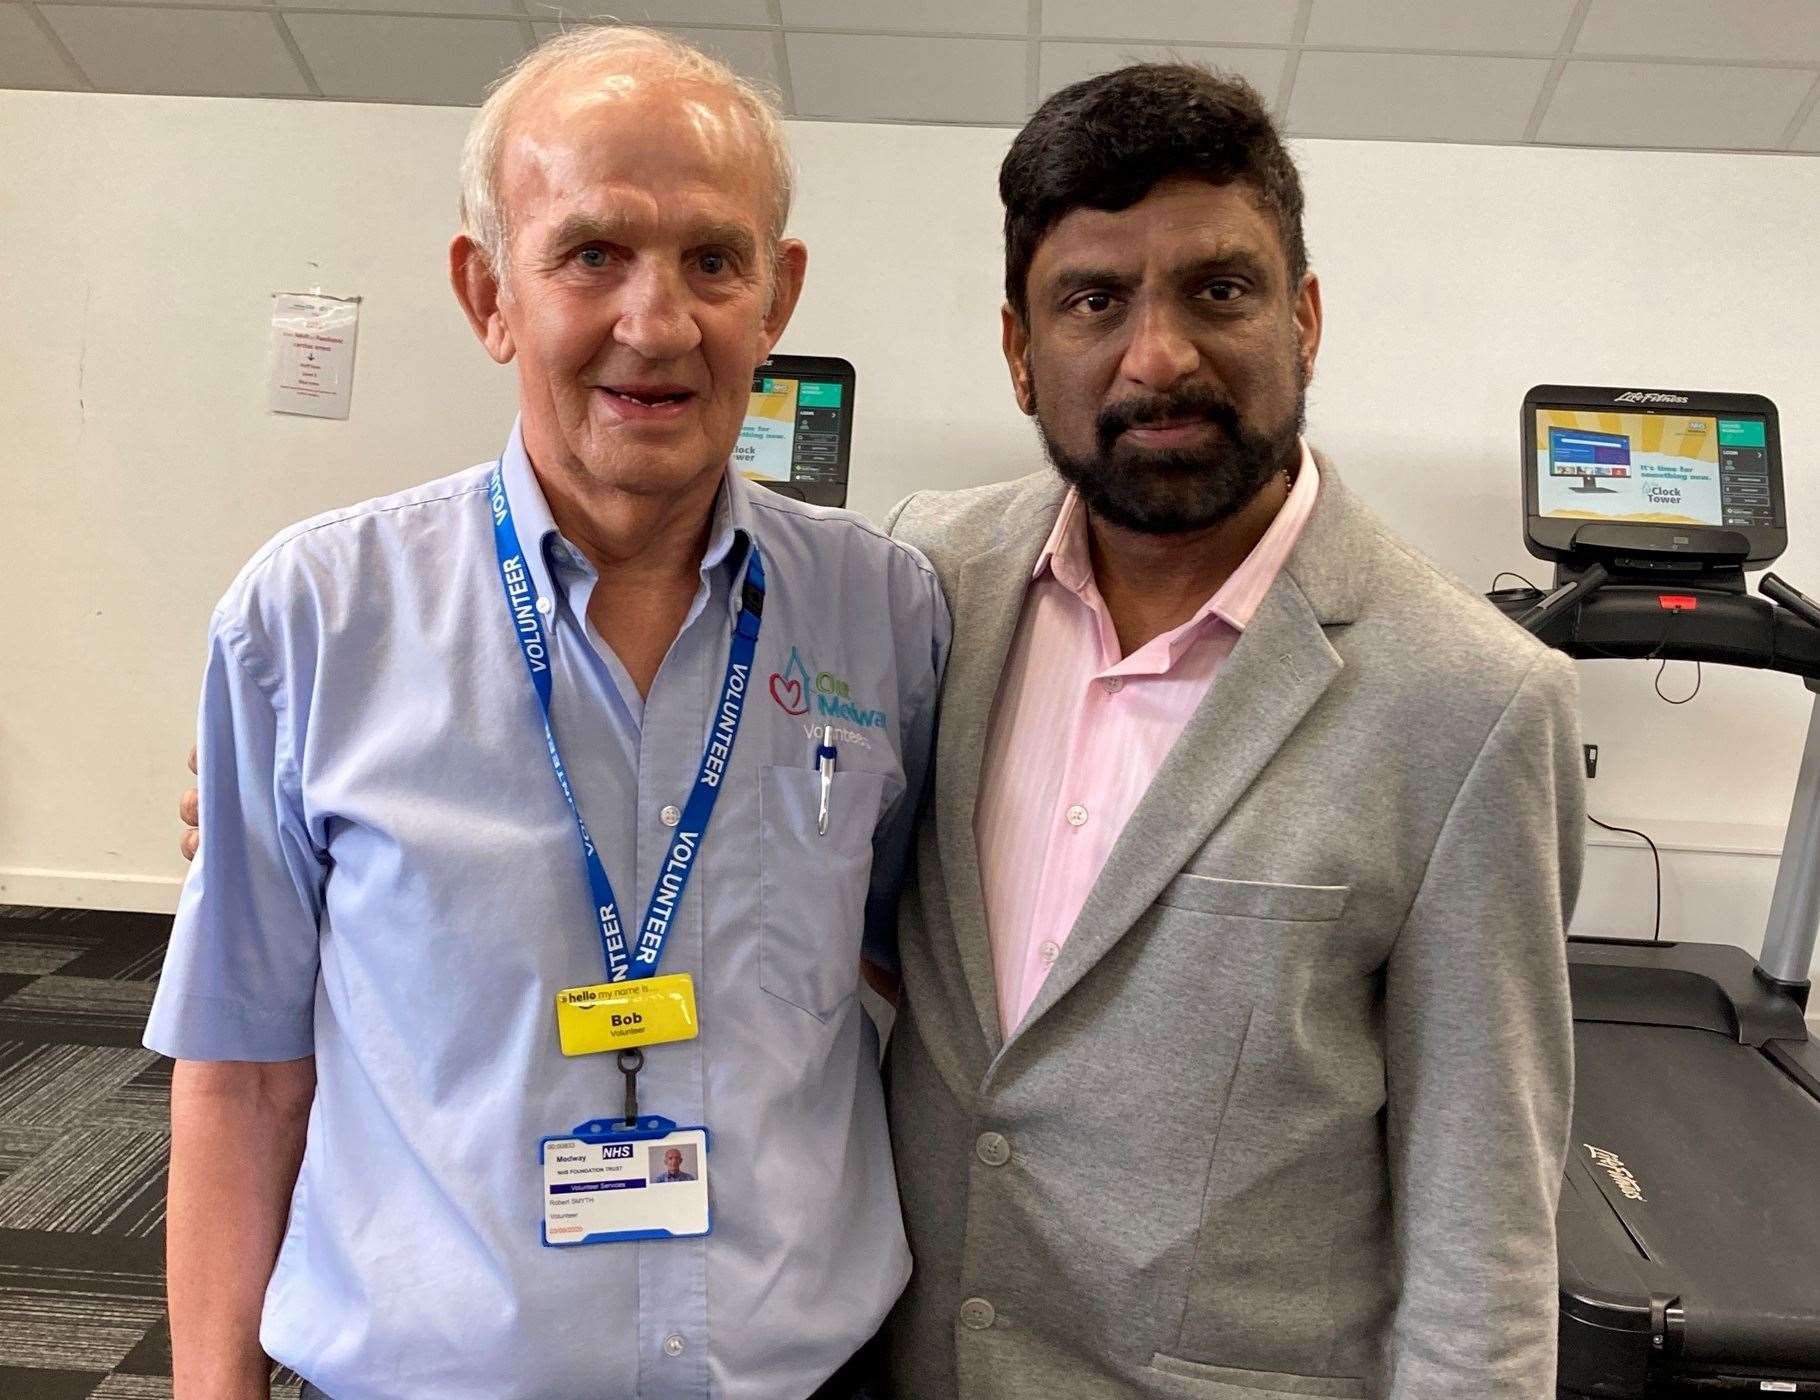 Doctor Srinivas Vinjamuri, right, discovered Bob, left, after he put his head round the door to see who was using the staff gym. Photo: Medway NHS Foundation Trust